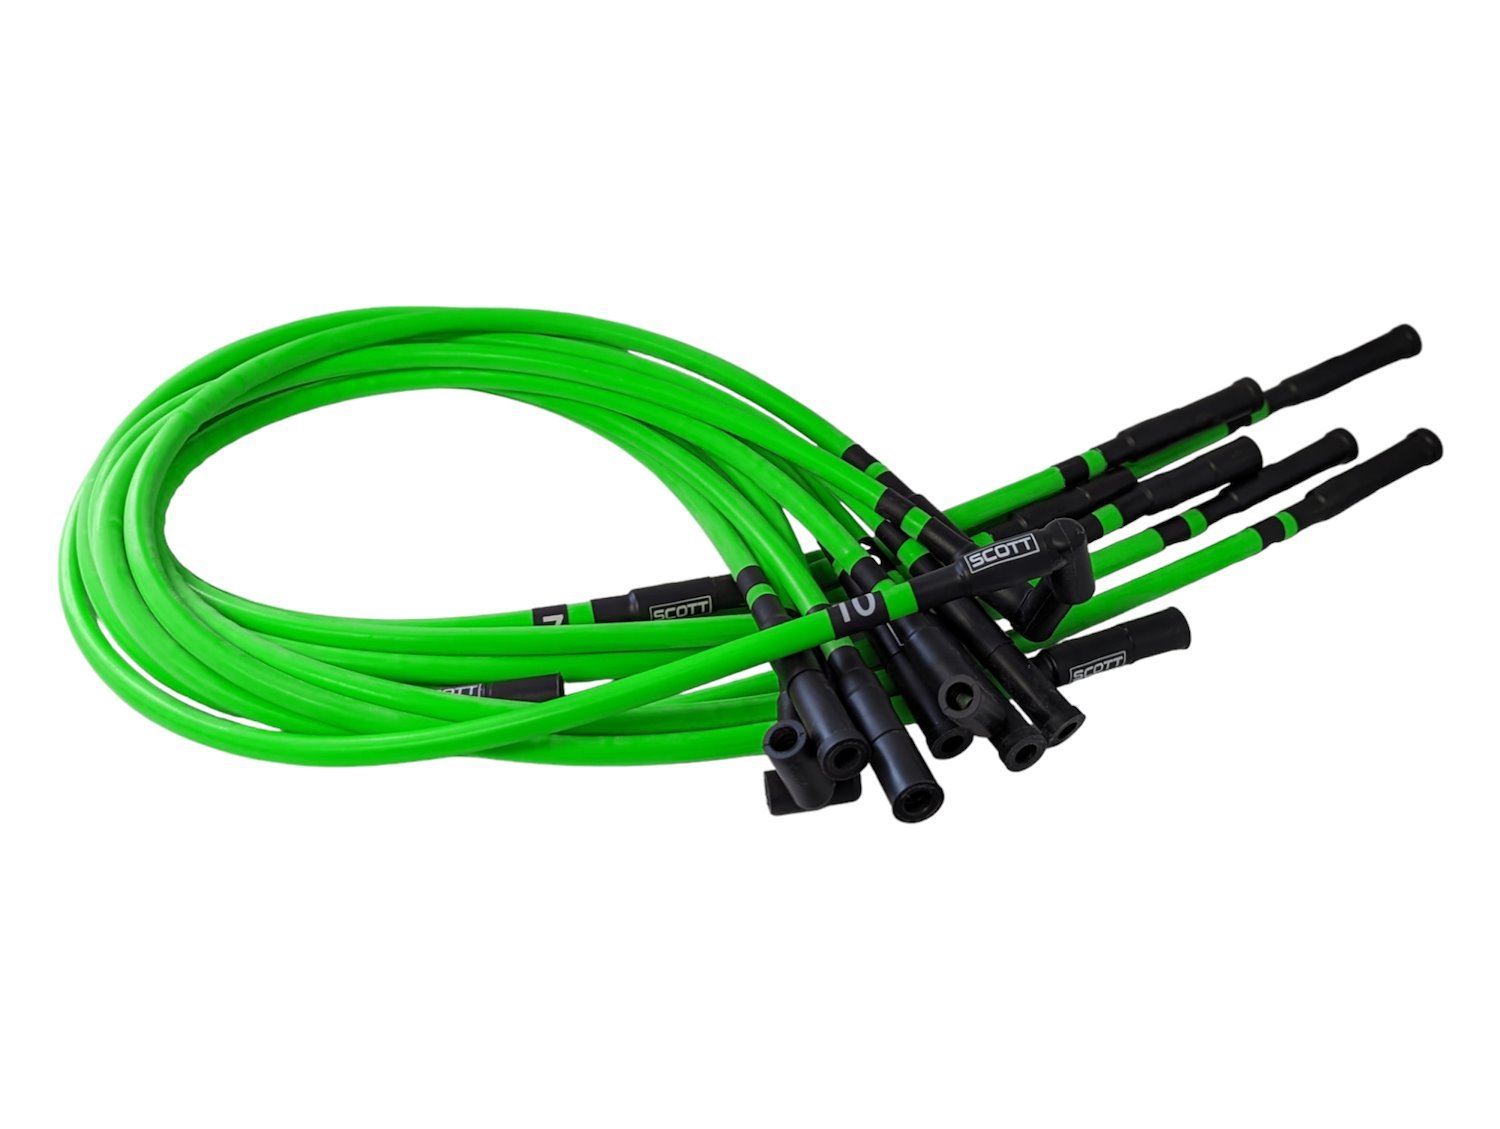 SPW-CH-690-III-8 High-Performance Silicone-Sleeved Spark Plug Wire Set for Dodge Viper (Gen-3) [Fluorescent Green]